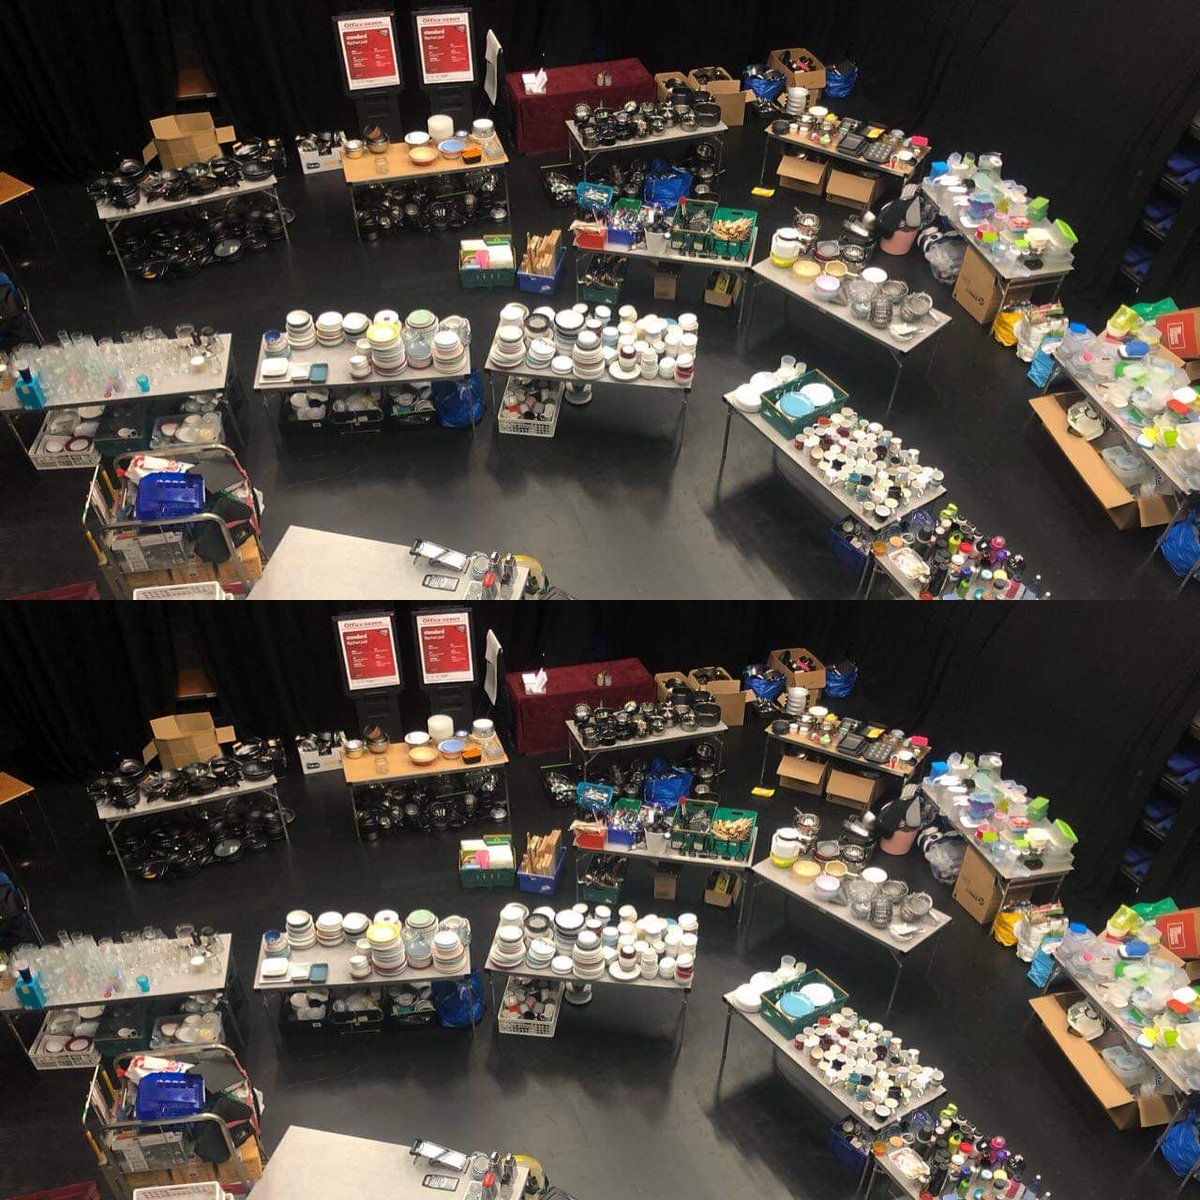 ATTENTION! Items collected over summer have now been sorted & ready for #PayAsYouFeel Market! Pots, pans, hangers, baking trays, mugs, cutlery, glass sets, & more. 

Reuse, save money & reduce your carbon impact! *Tomorrow & Sunday at 10 am* 

@warwickuni @WarwickSU @theboarnews